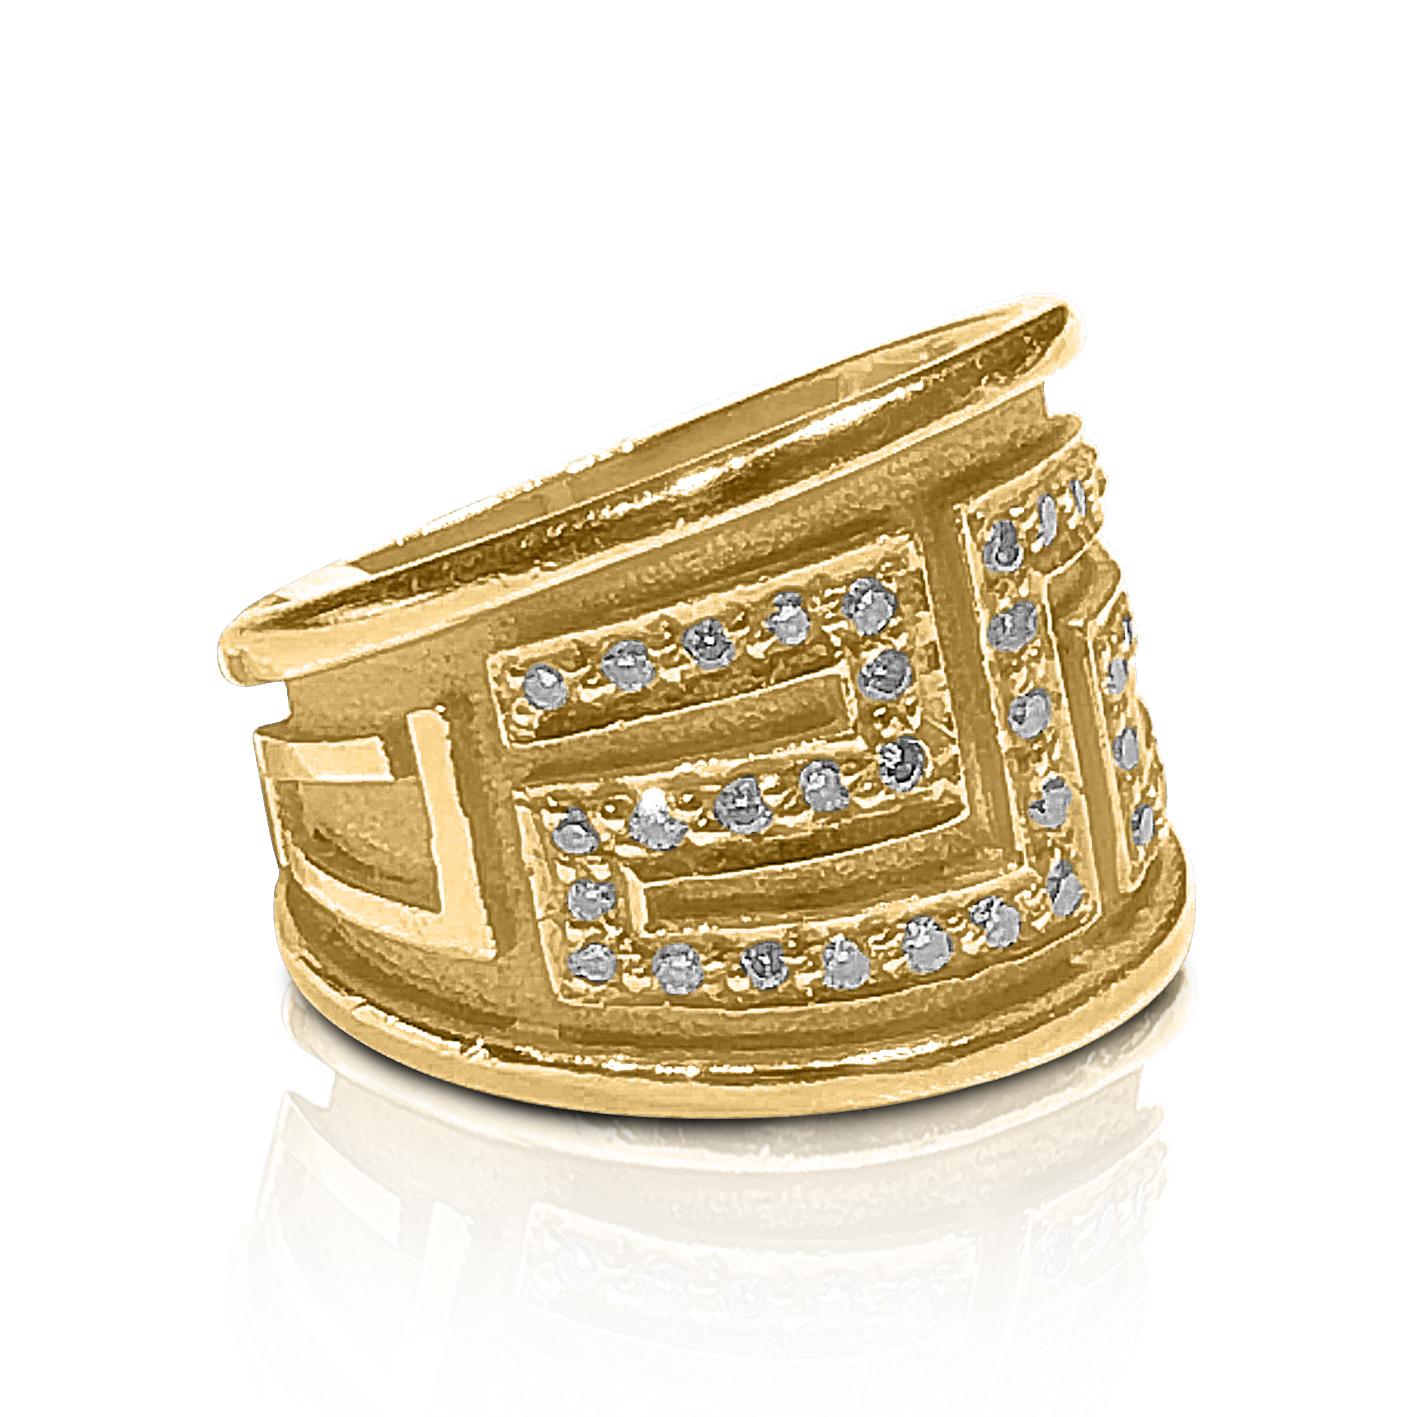 S.Georgios designer 18 Karat Yellow Gold Hand Made Diamond Band Ring with the Greek Key design that symbolizes eternity. The design is known as the symbol of long life and is one of the most classic designs in the world. This gorgeous Ring is